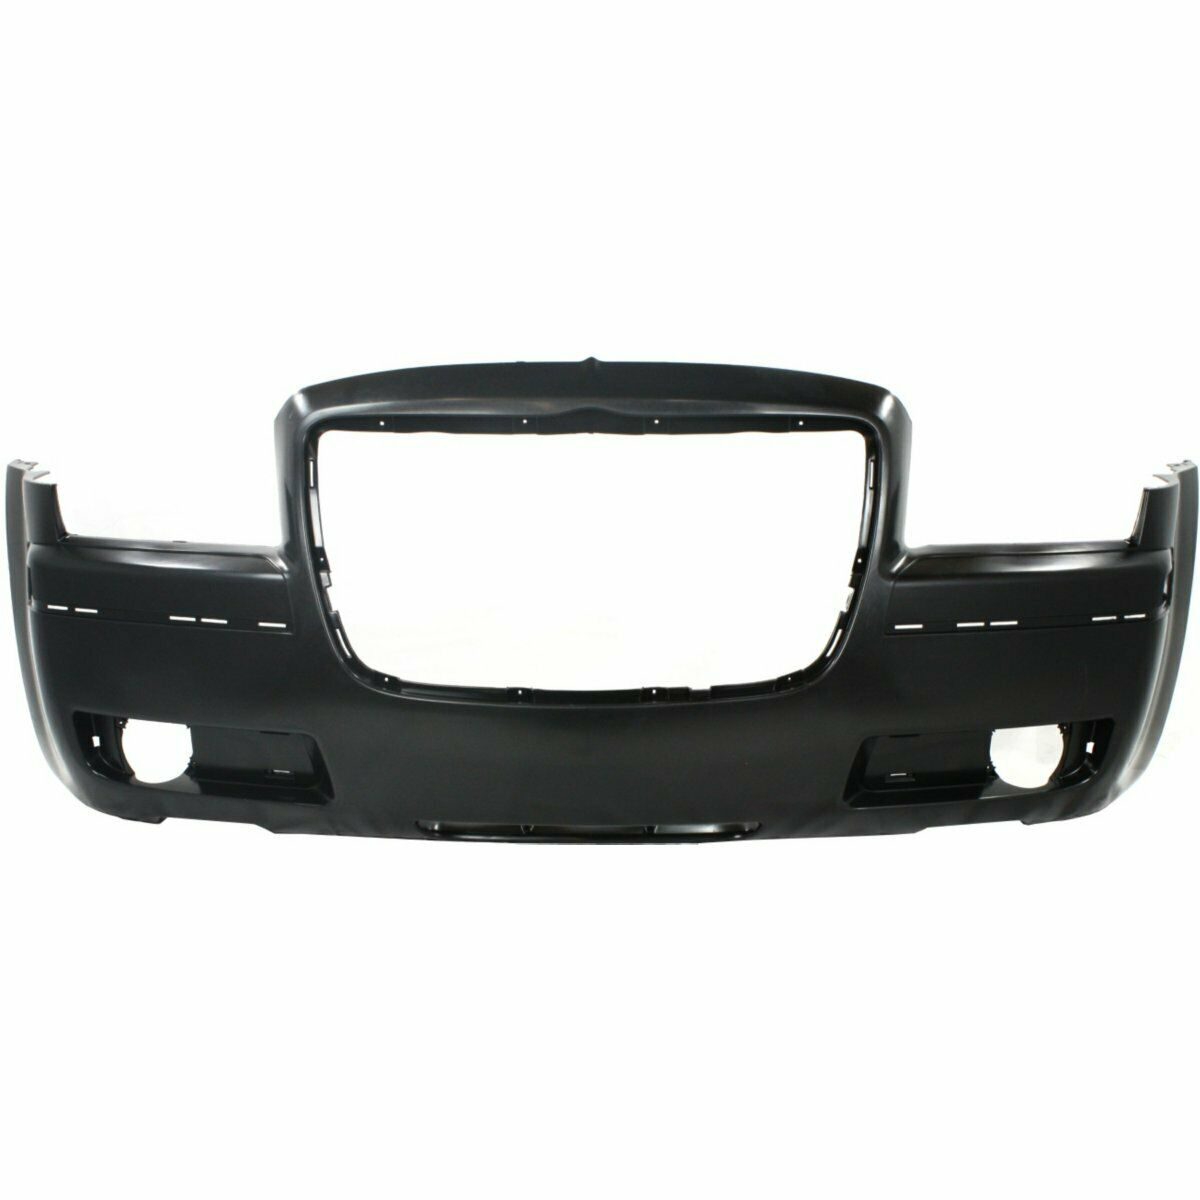 2005-2010 Chrysler 300 w/Fog 3.5L Front Bumper Painted to Match